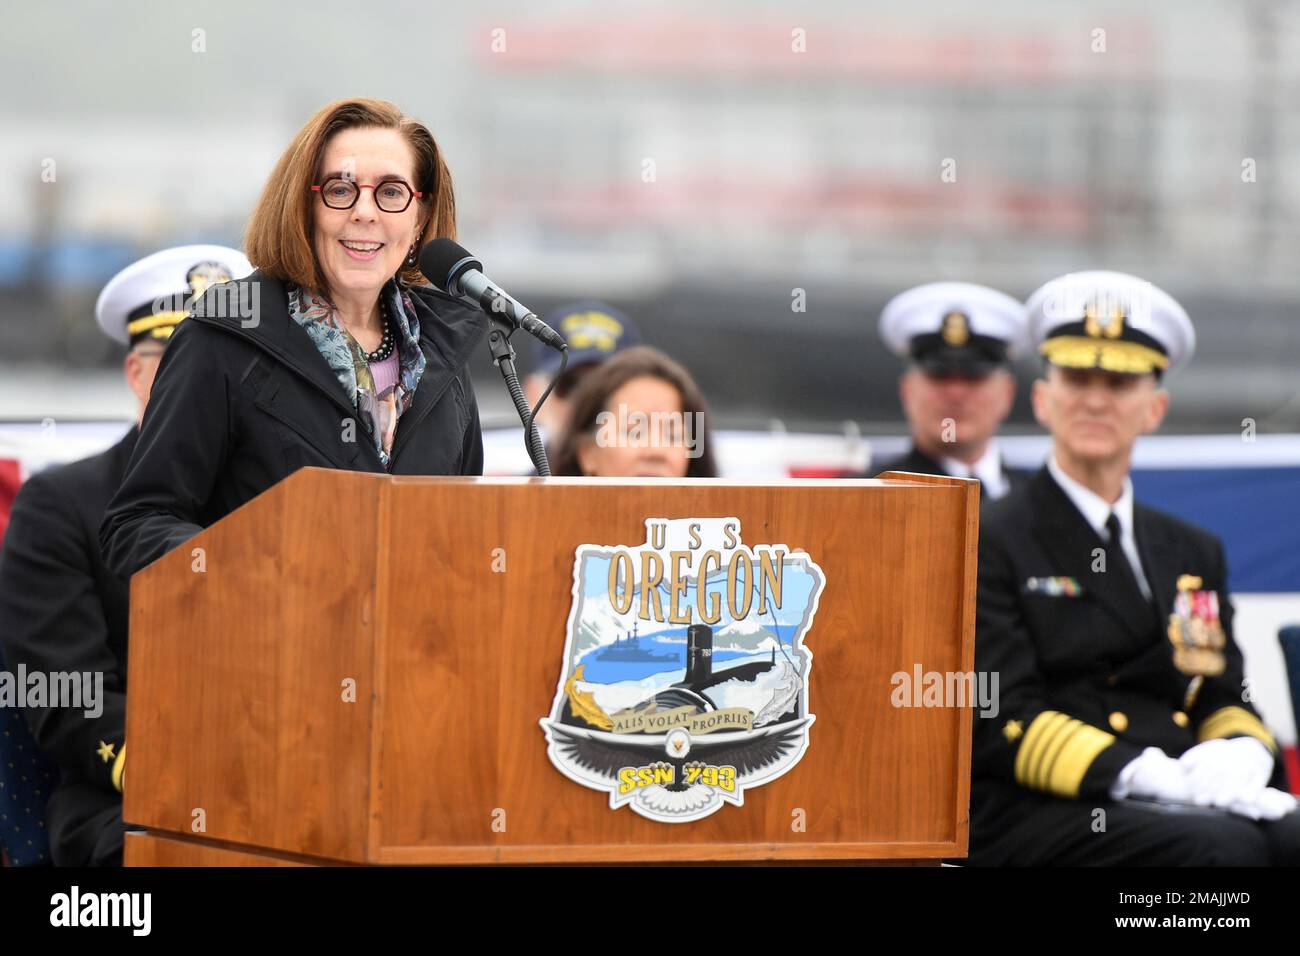 220528-N-GR655-0097 GROTON, Connecticut (May 28, 2022) – Gov. Kate Brown of Oregon delivers remarks during a commissioning ceremony for the Virginia-class fast attack submarine USS Oregon (SSN 793) in Groton, Conn., May 28, 2022. SSN 793, the third U.S Navy ship launched with the name Oregon and first in more than a century, is a flexible, multi-mission platform designed to carry out the seven core competencies of the submarine force: anti-submarine warfare; anti-surface warfare; delivery of special operations forces; strike warfare; irregular warfare; intelligence, surveillance and reconnaiss Stock Photo